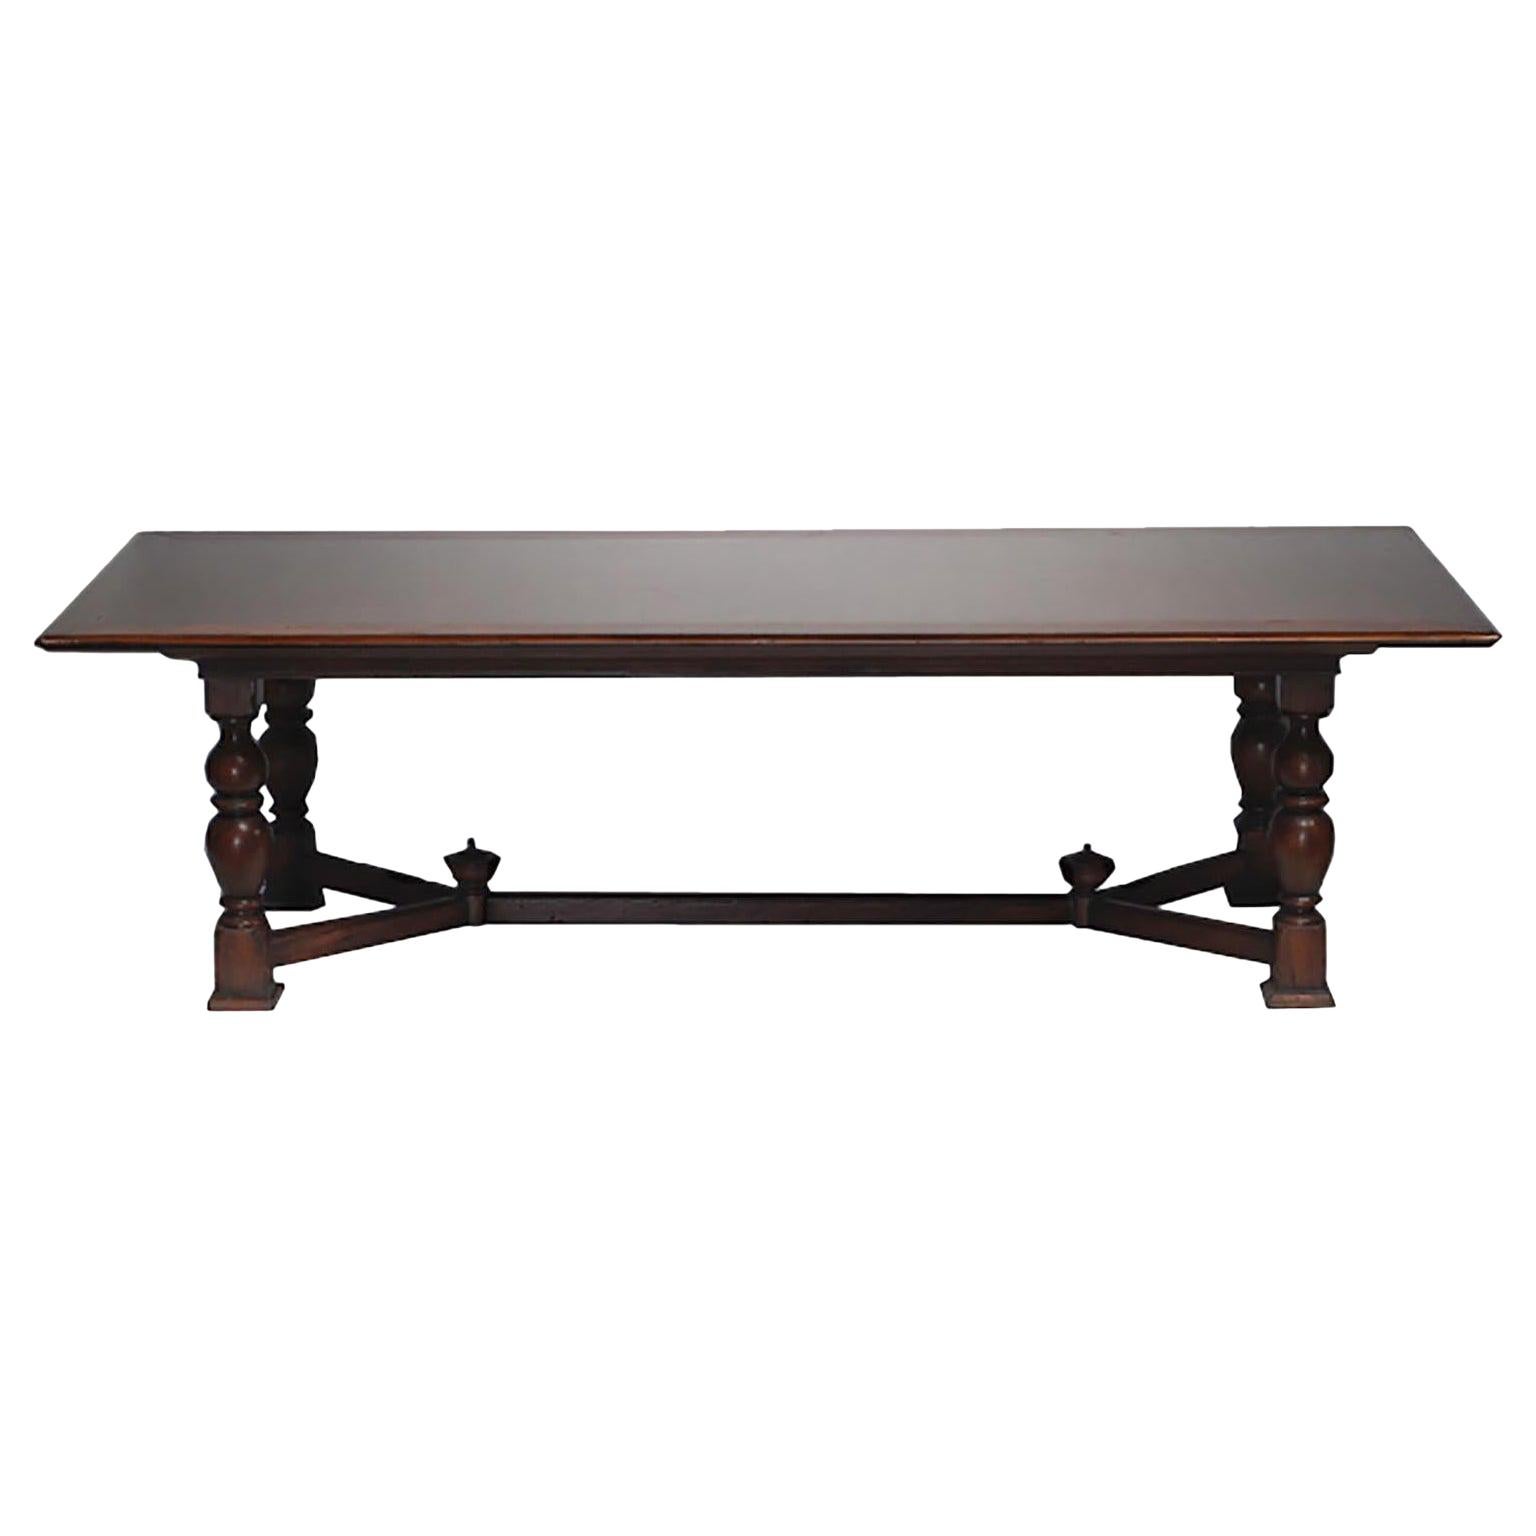 Large Alfonso Marina Handcrafted Dining Table, circa 2003